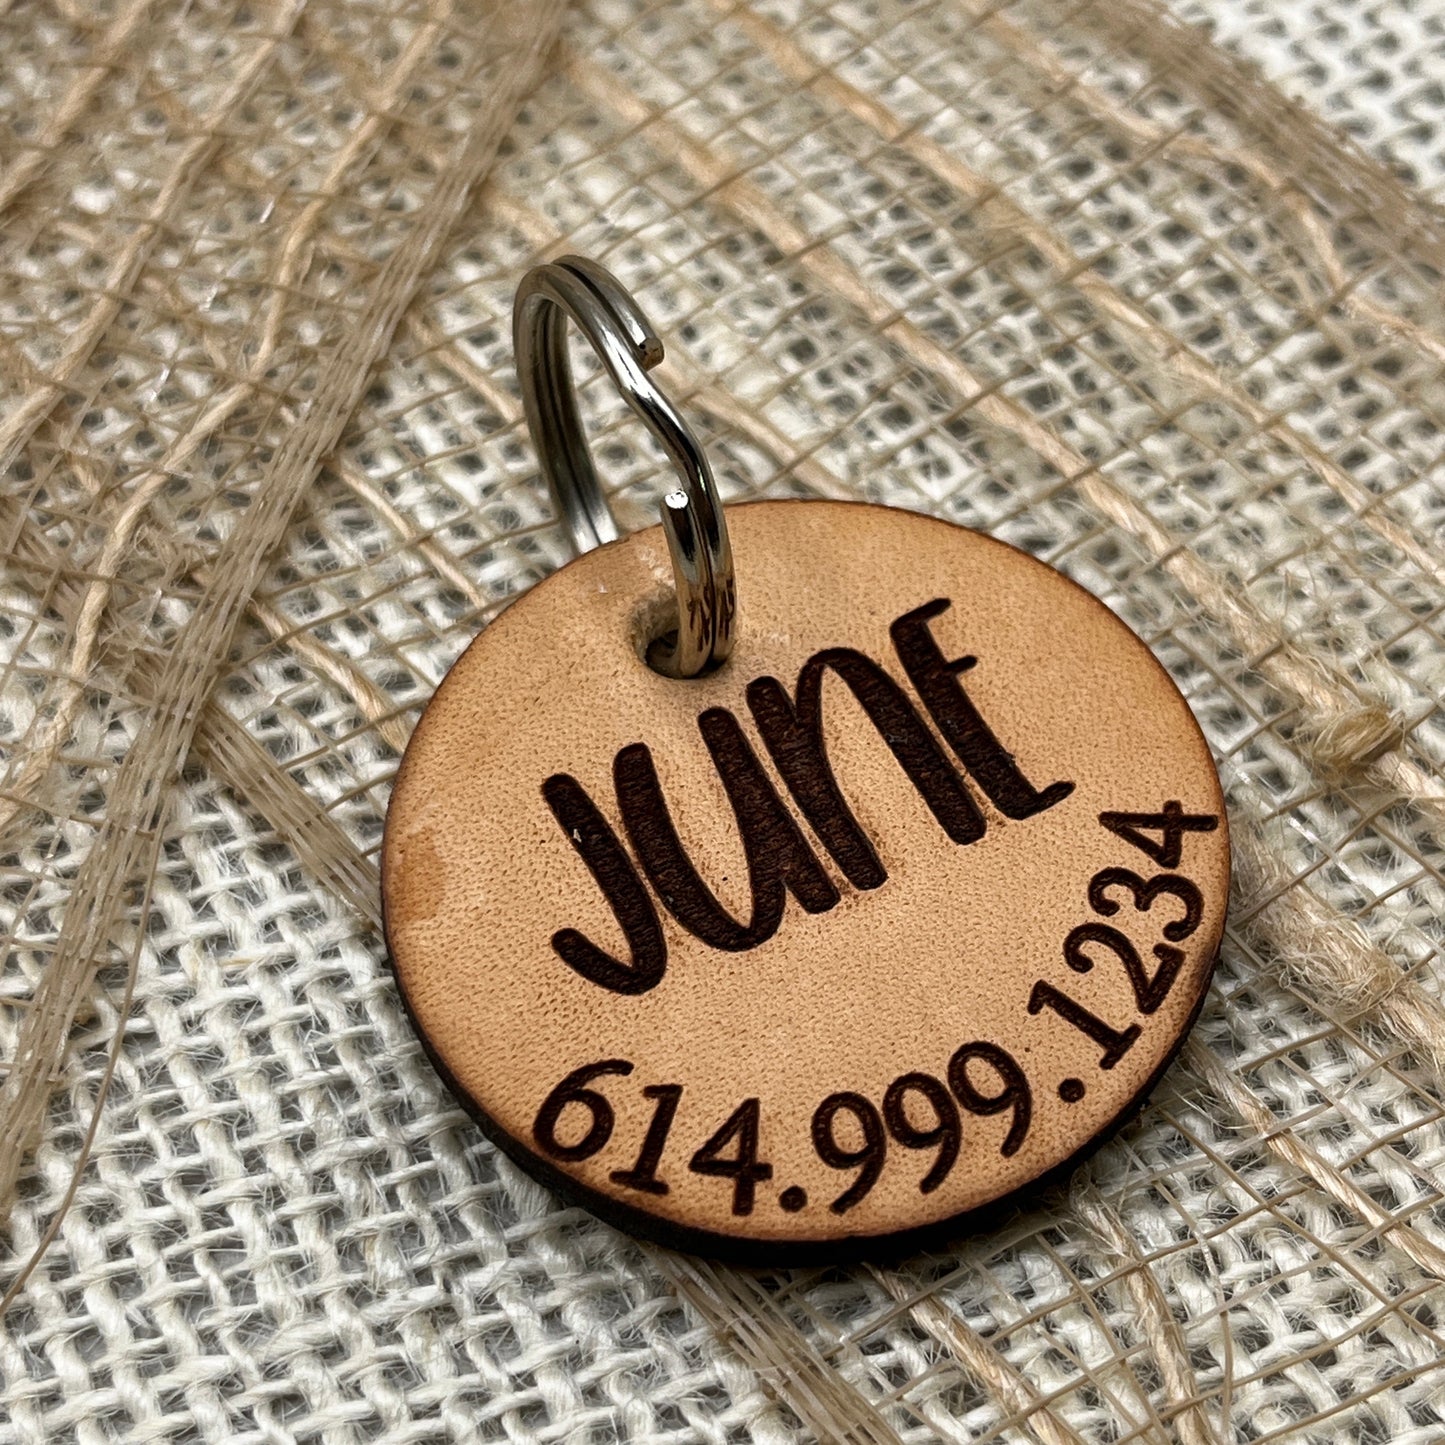 Quiet Dog Tag, Laser Engraved Genuine Leather Pet ID Tag